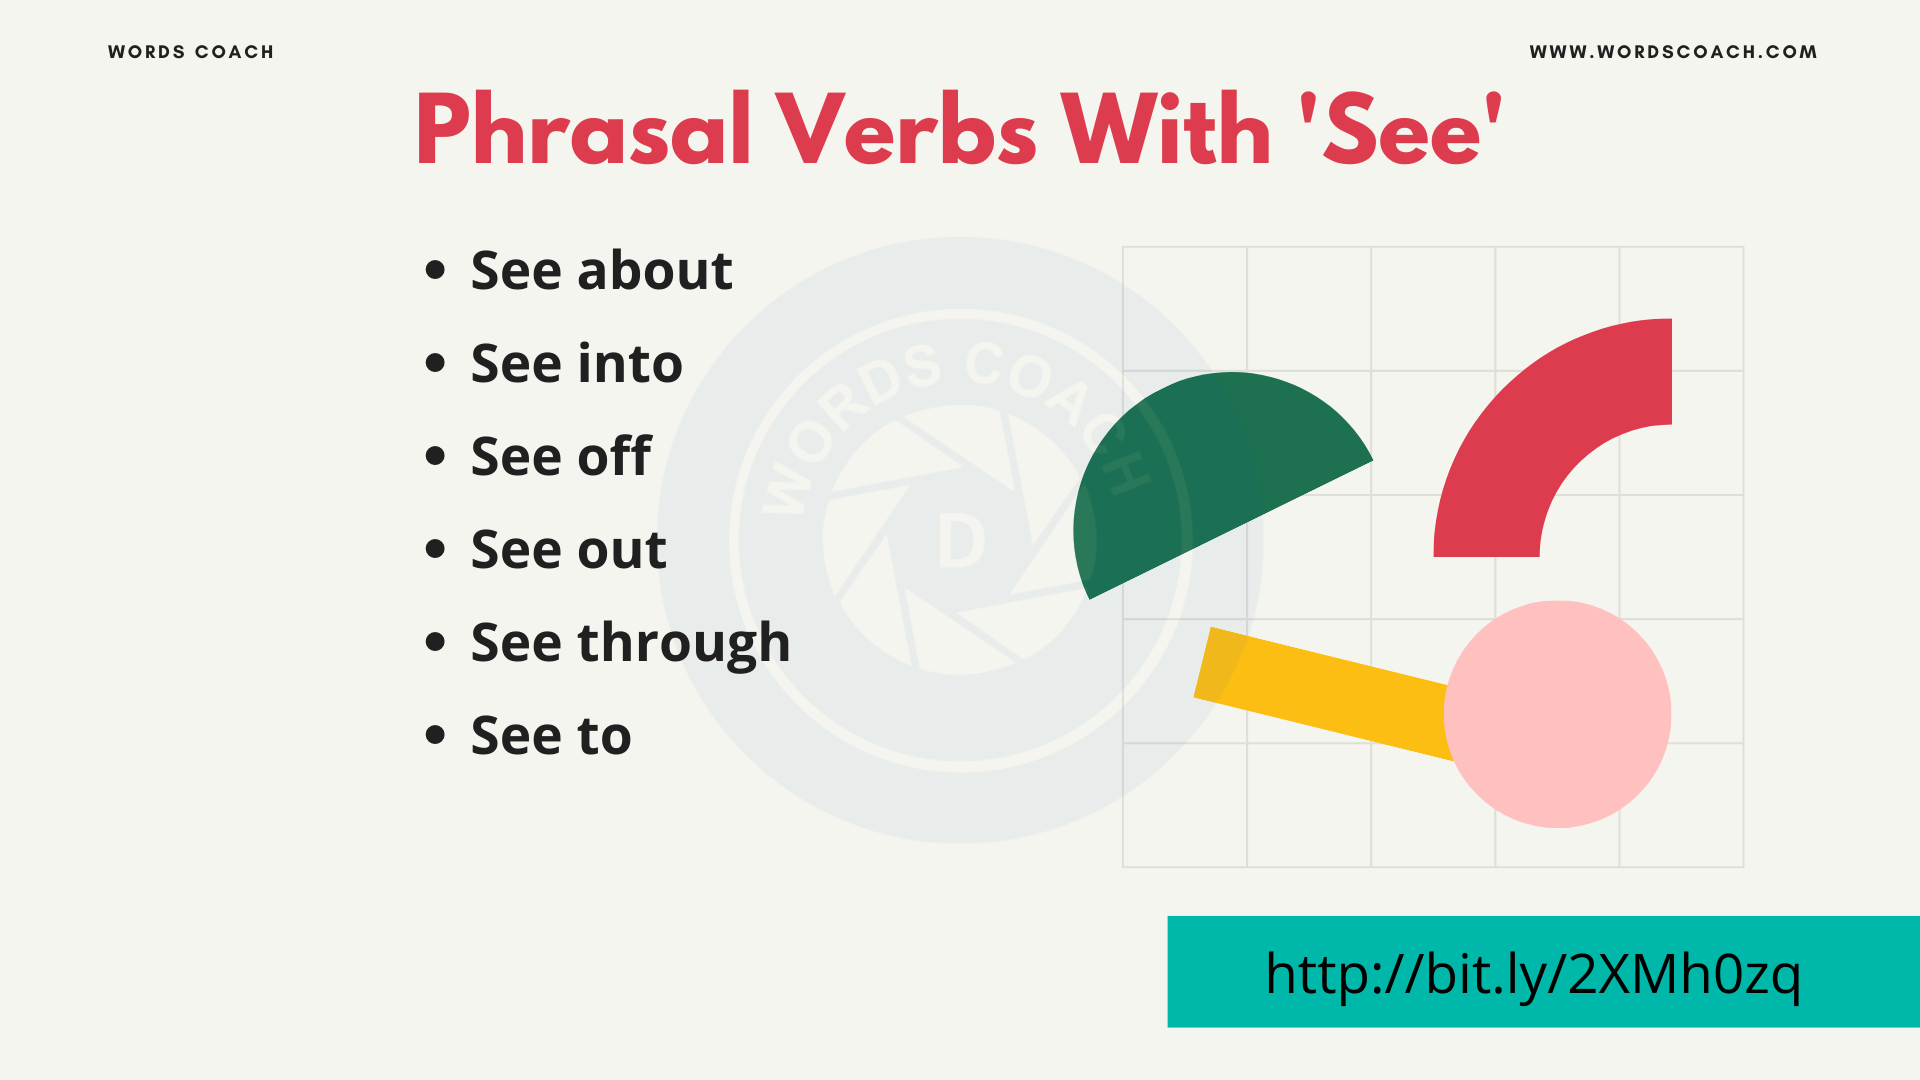 Phrasal Verbs With 'See' - wordscoach.com